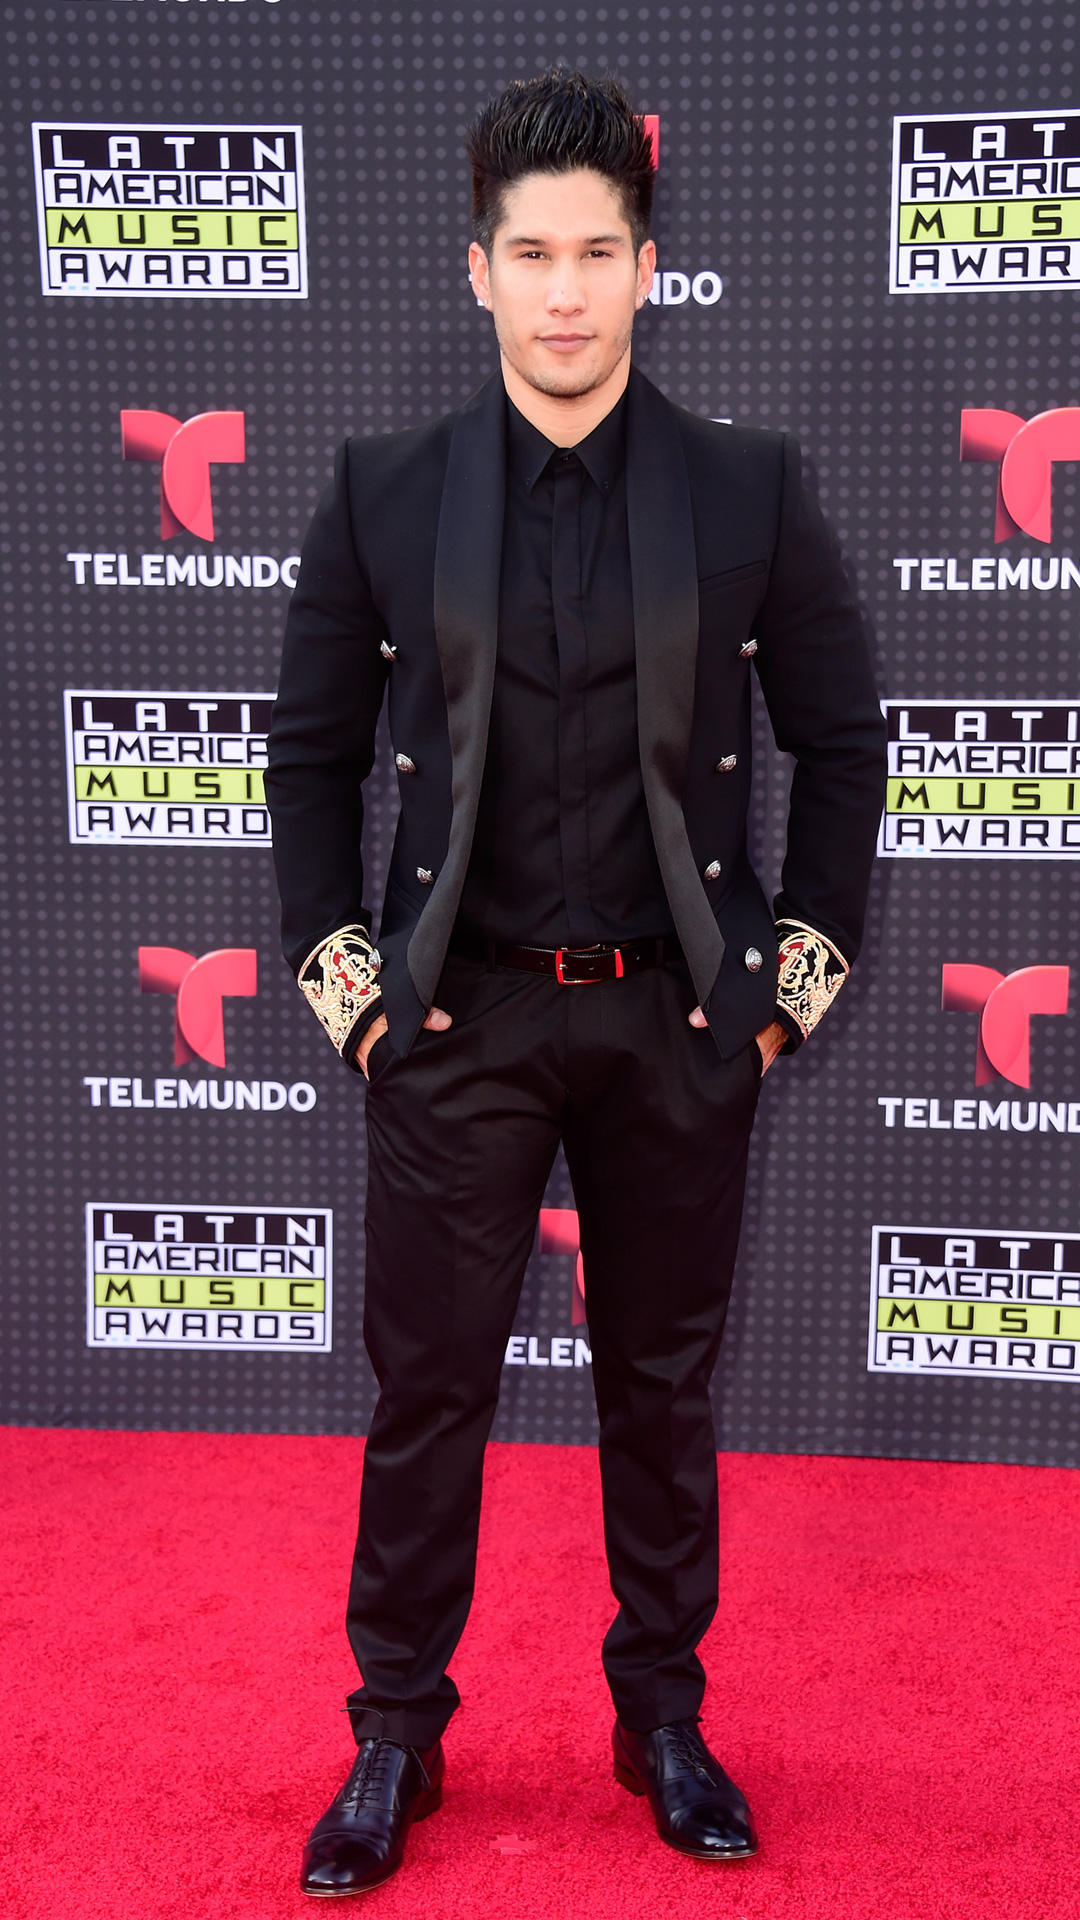 HOLLYWOOD, CA - OCTOBER 08: Chino attends Telemundo's Latin American Music Awards at the Dolby Theatre on October 8, 2015 in Hollywood, California. (Photo by Frazer Harrison/Getty Images)